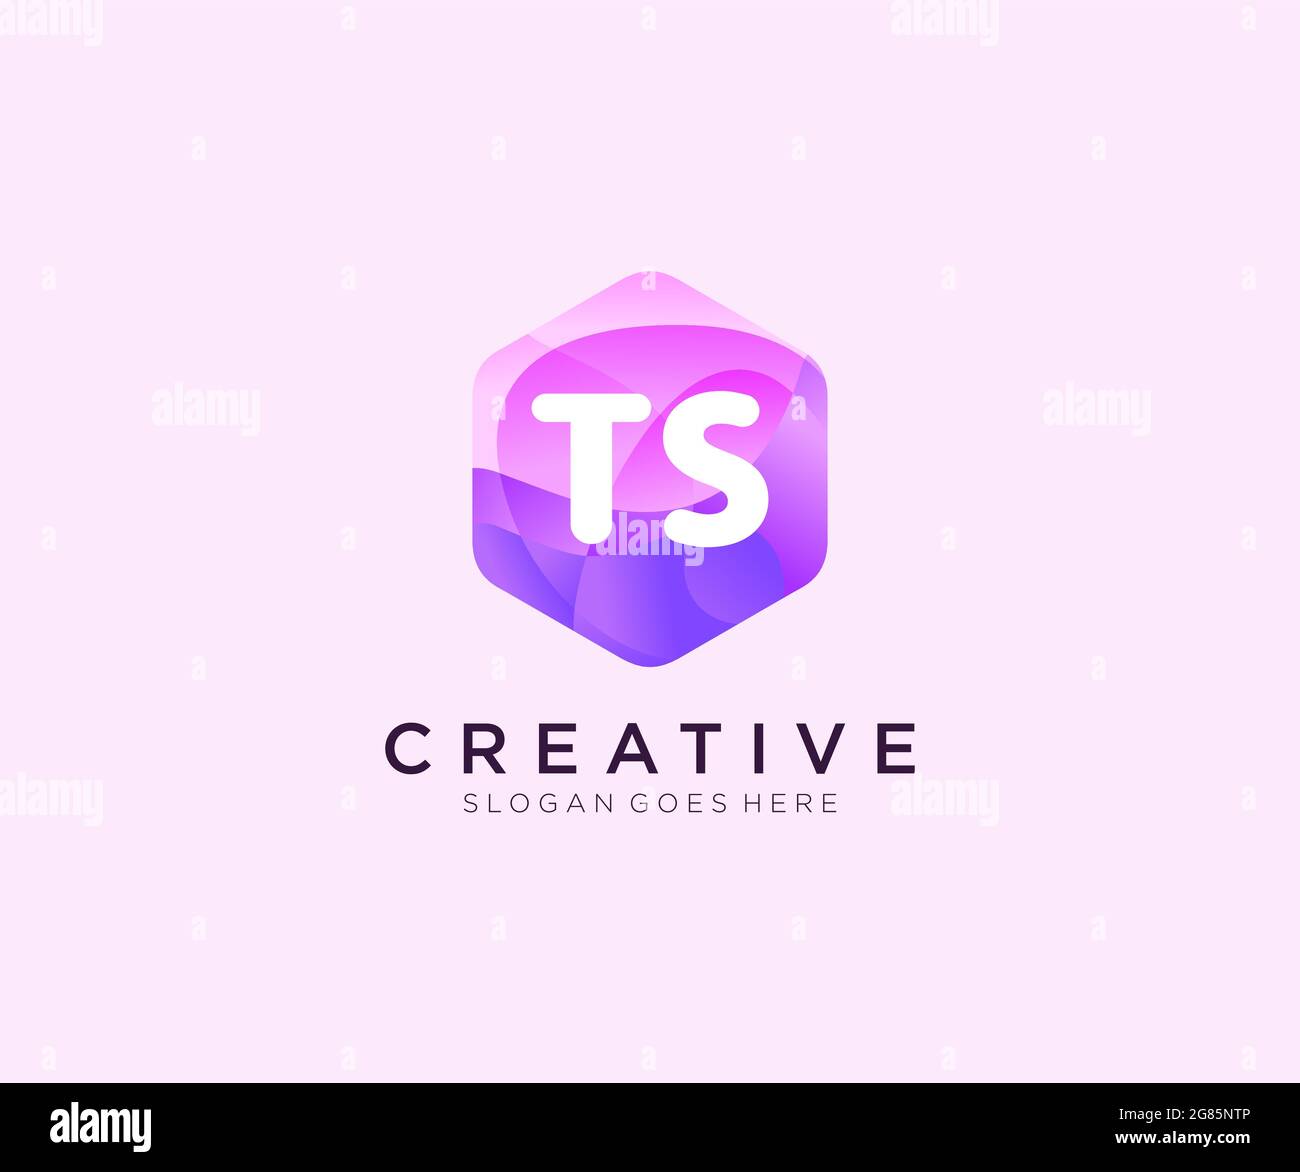 Ts initial logo Stock Vector Images - Alamy